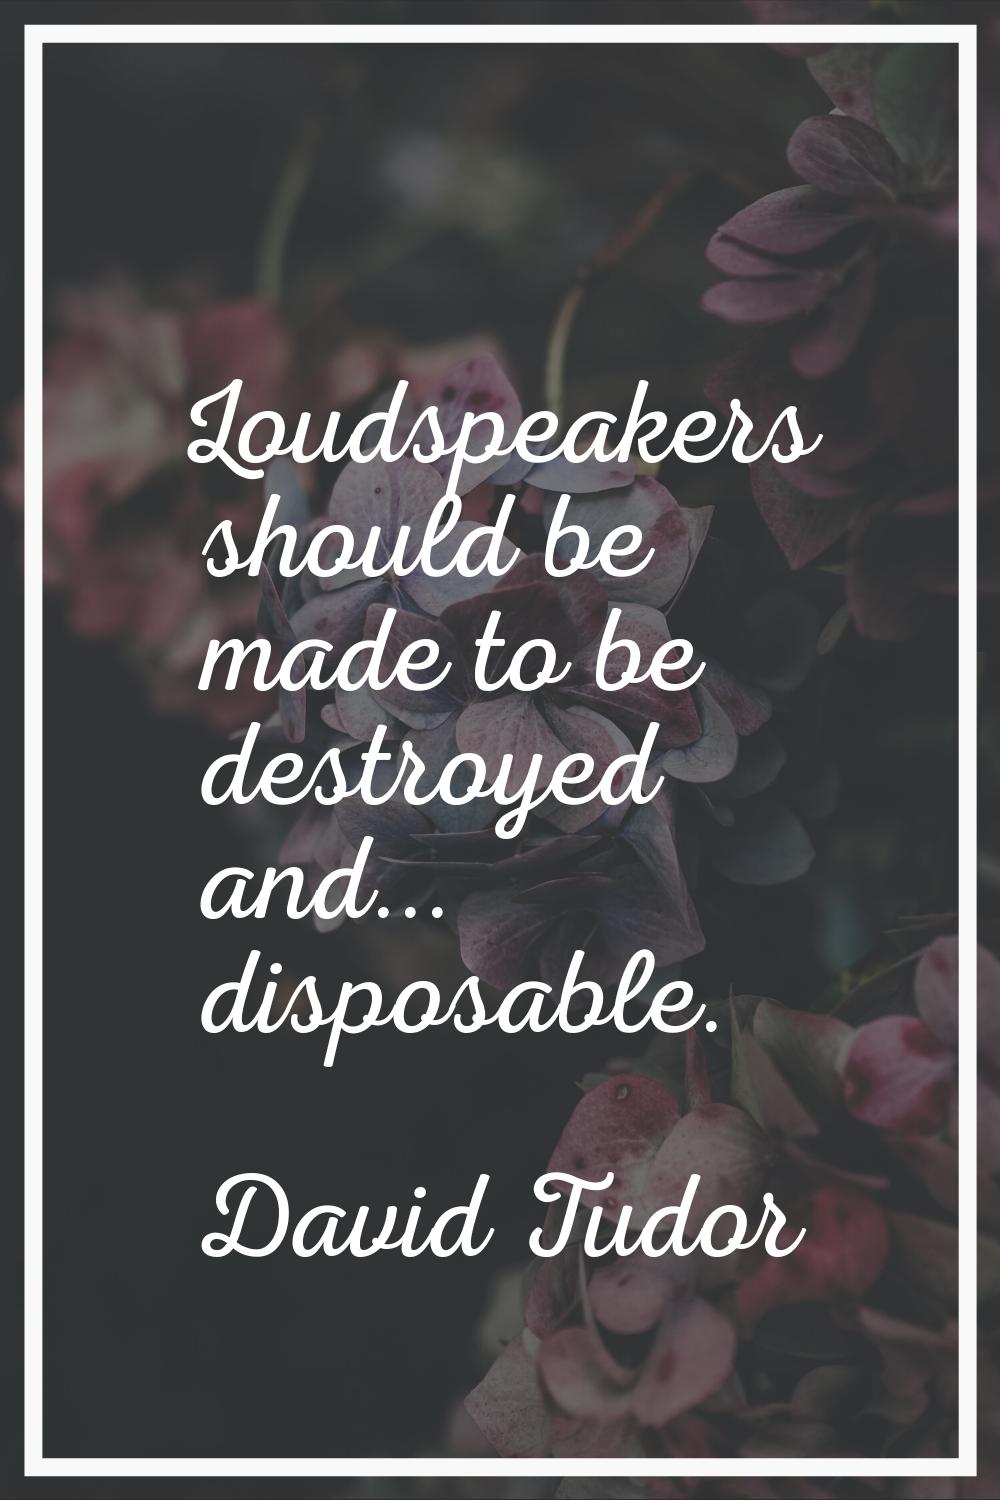 Loudspeakers should be made to be destroyed and... disposable.